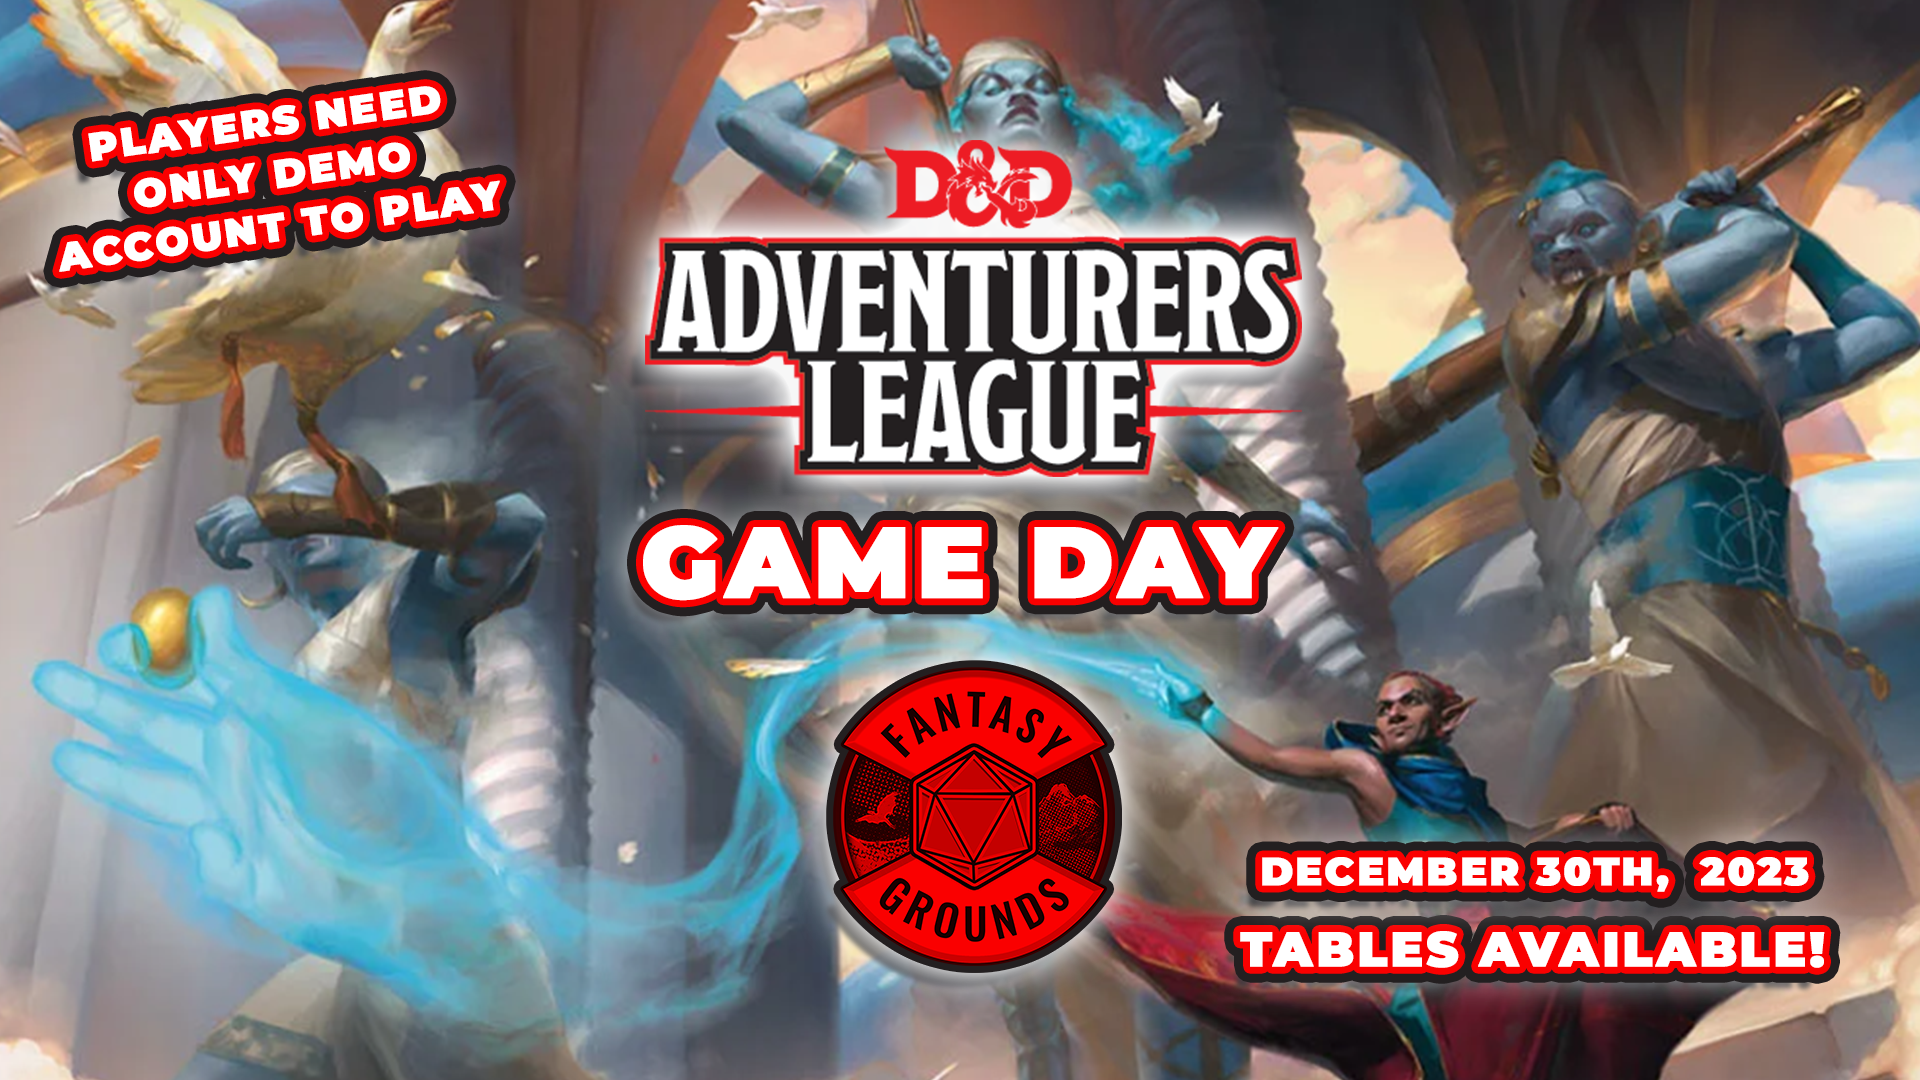 Dec 30 FG AD League Game Day 3.png